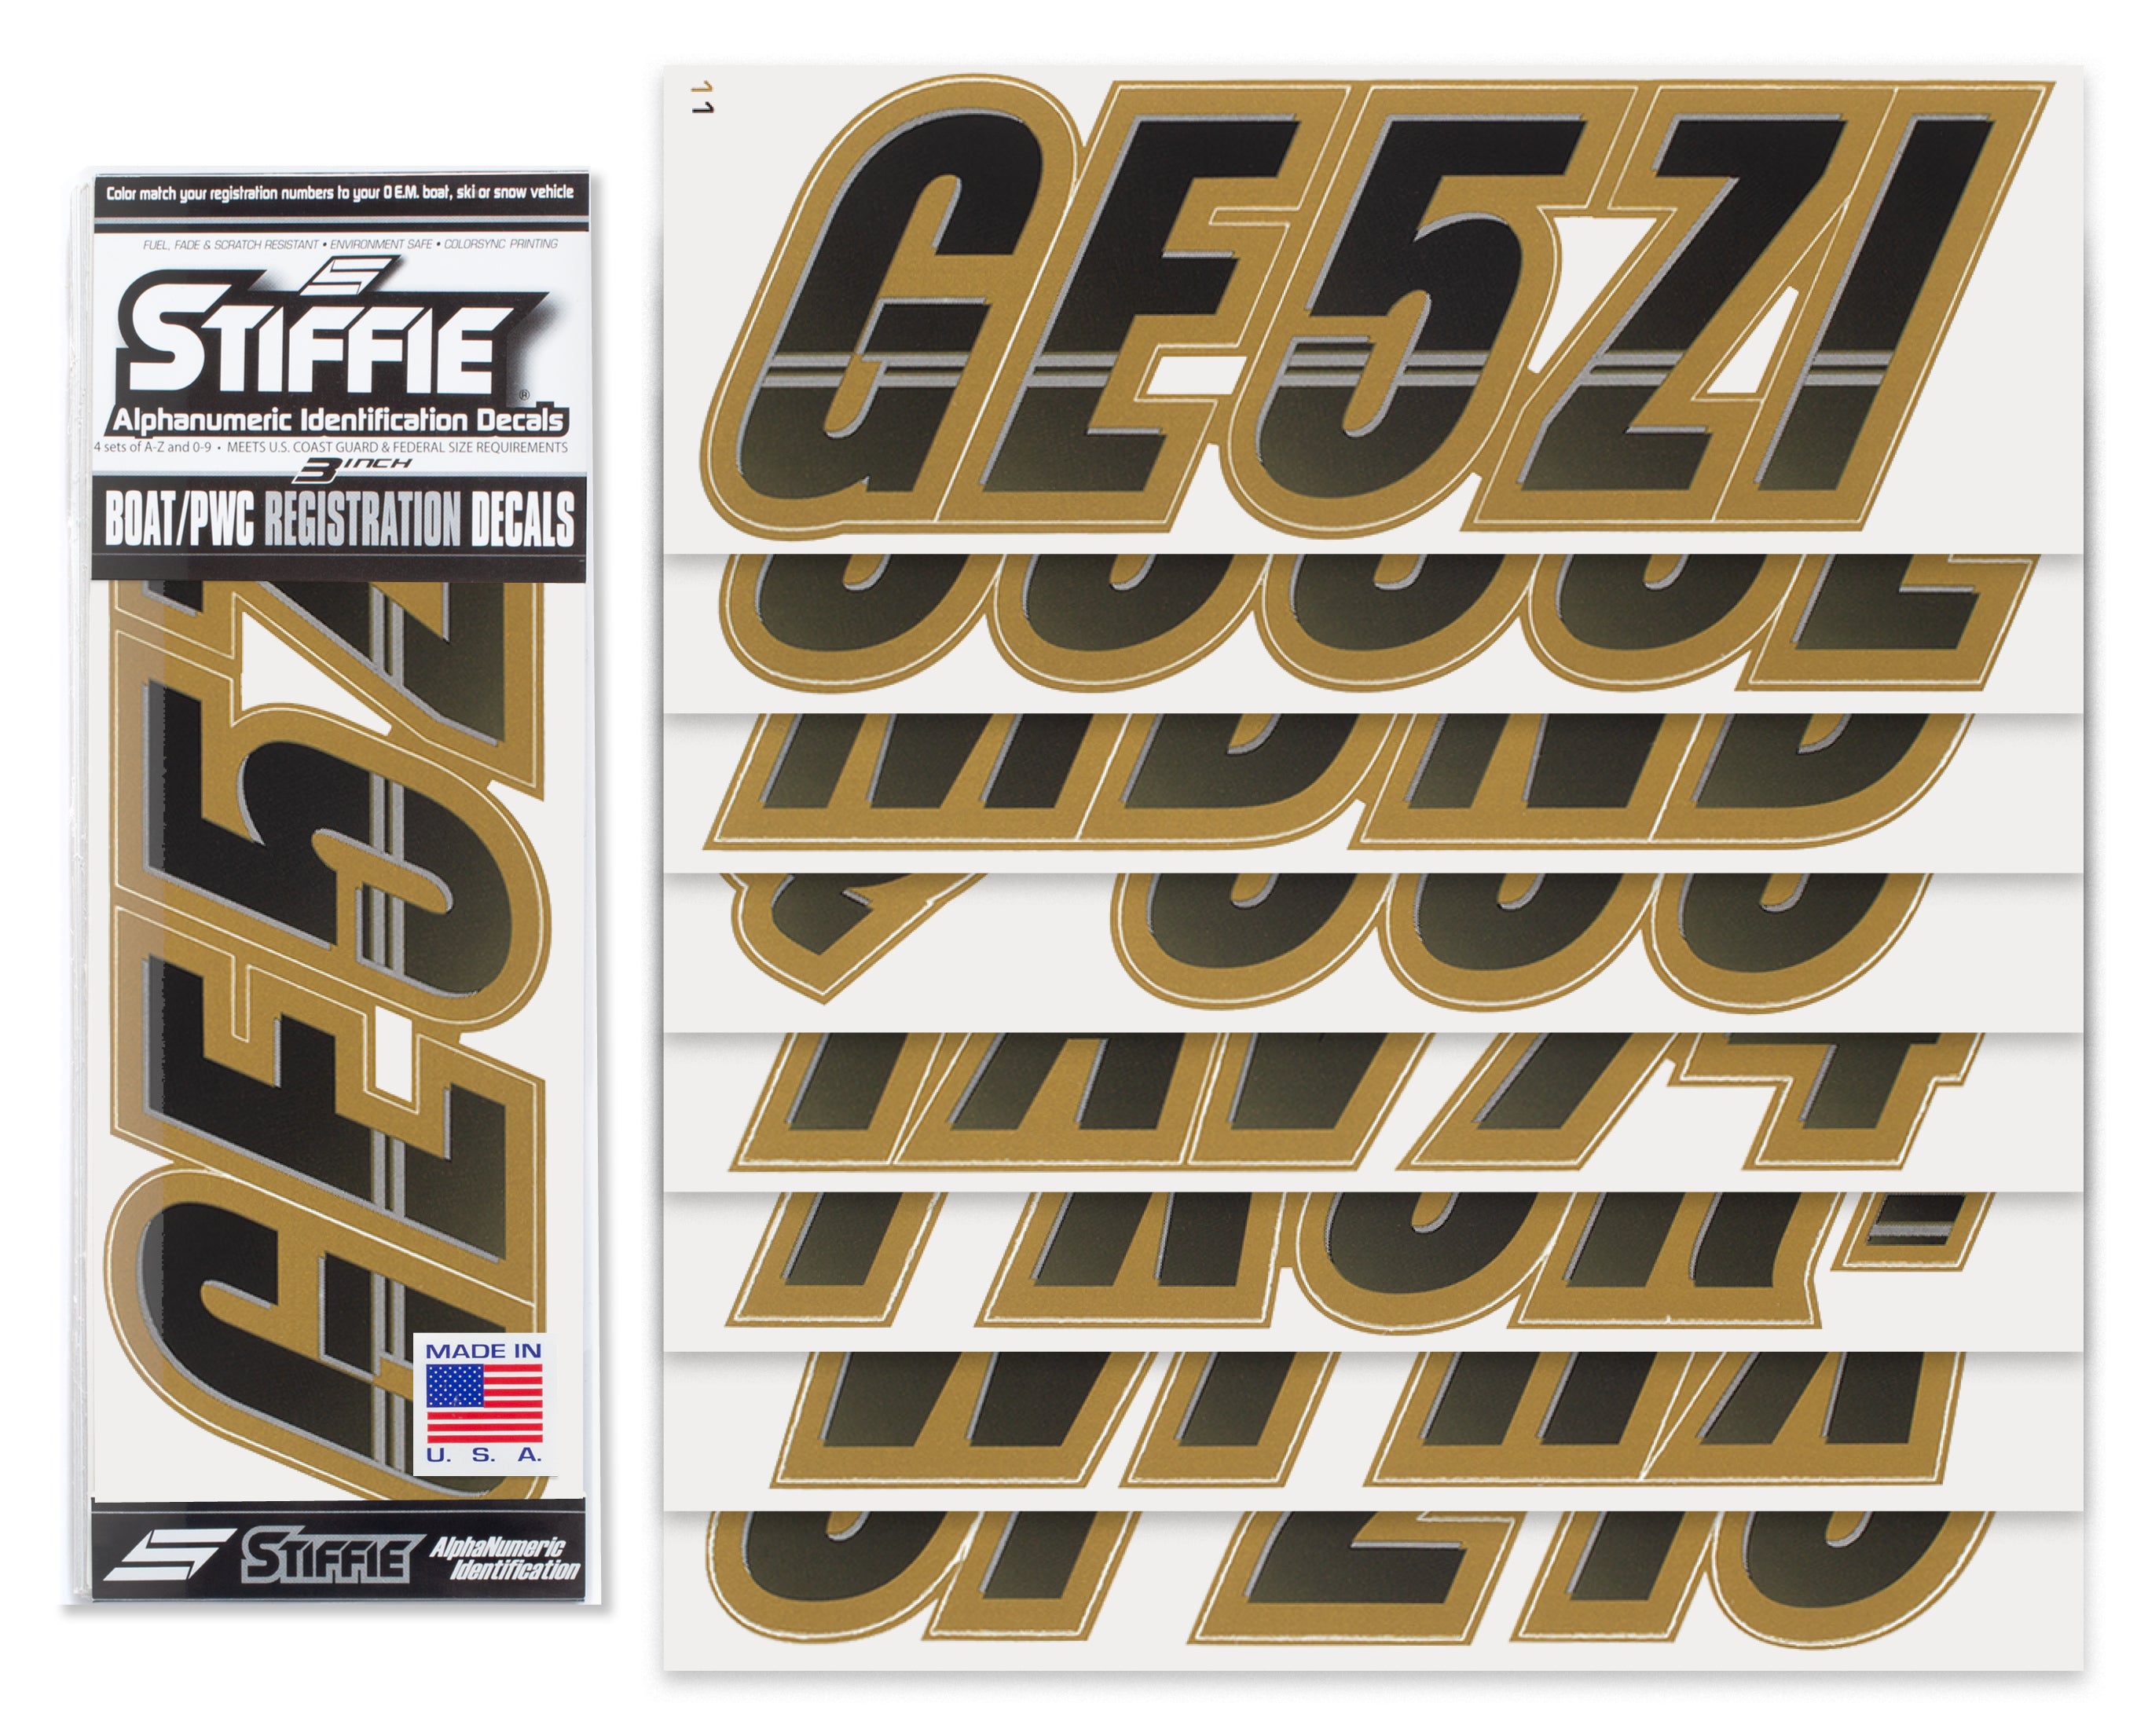 Stiffie Techtron Black/Metallic Gold 3" Alpha-Numeric Registration Identification Numbers Stickers Decals for Boats & Personal Watercraft